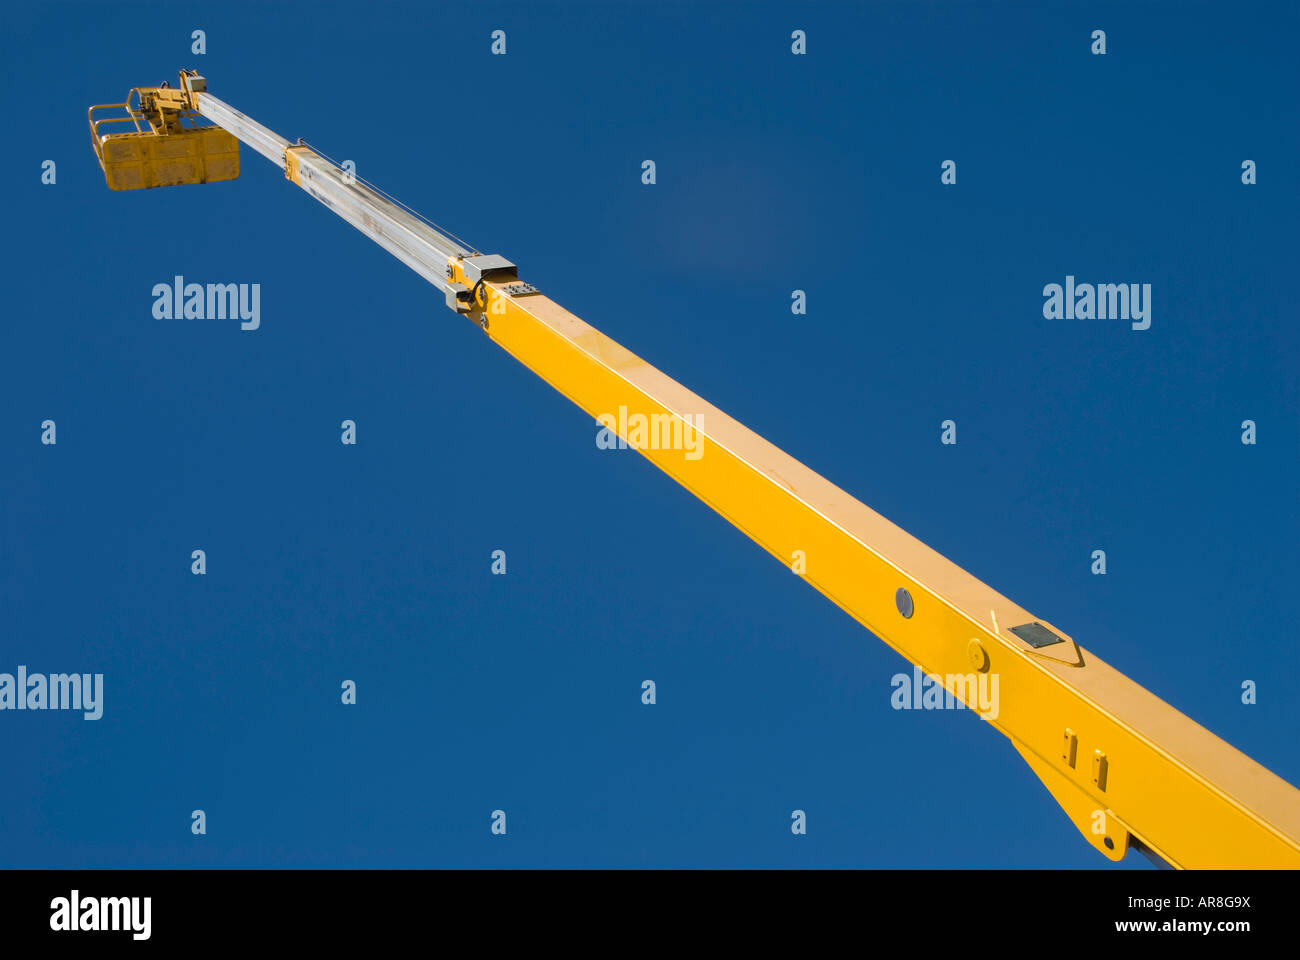 A very tall boom lift in use Stock Photo